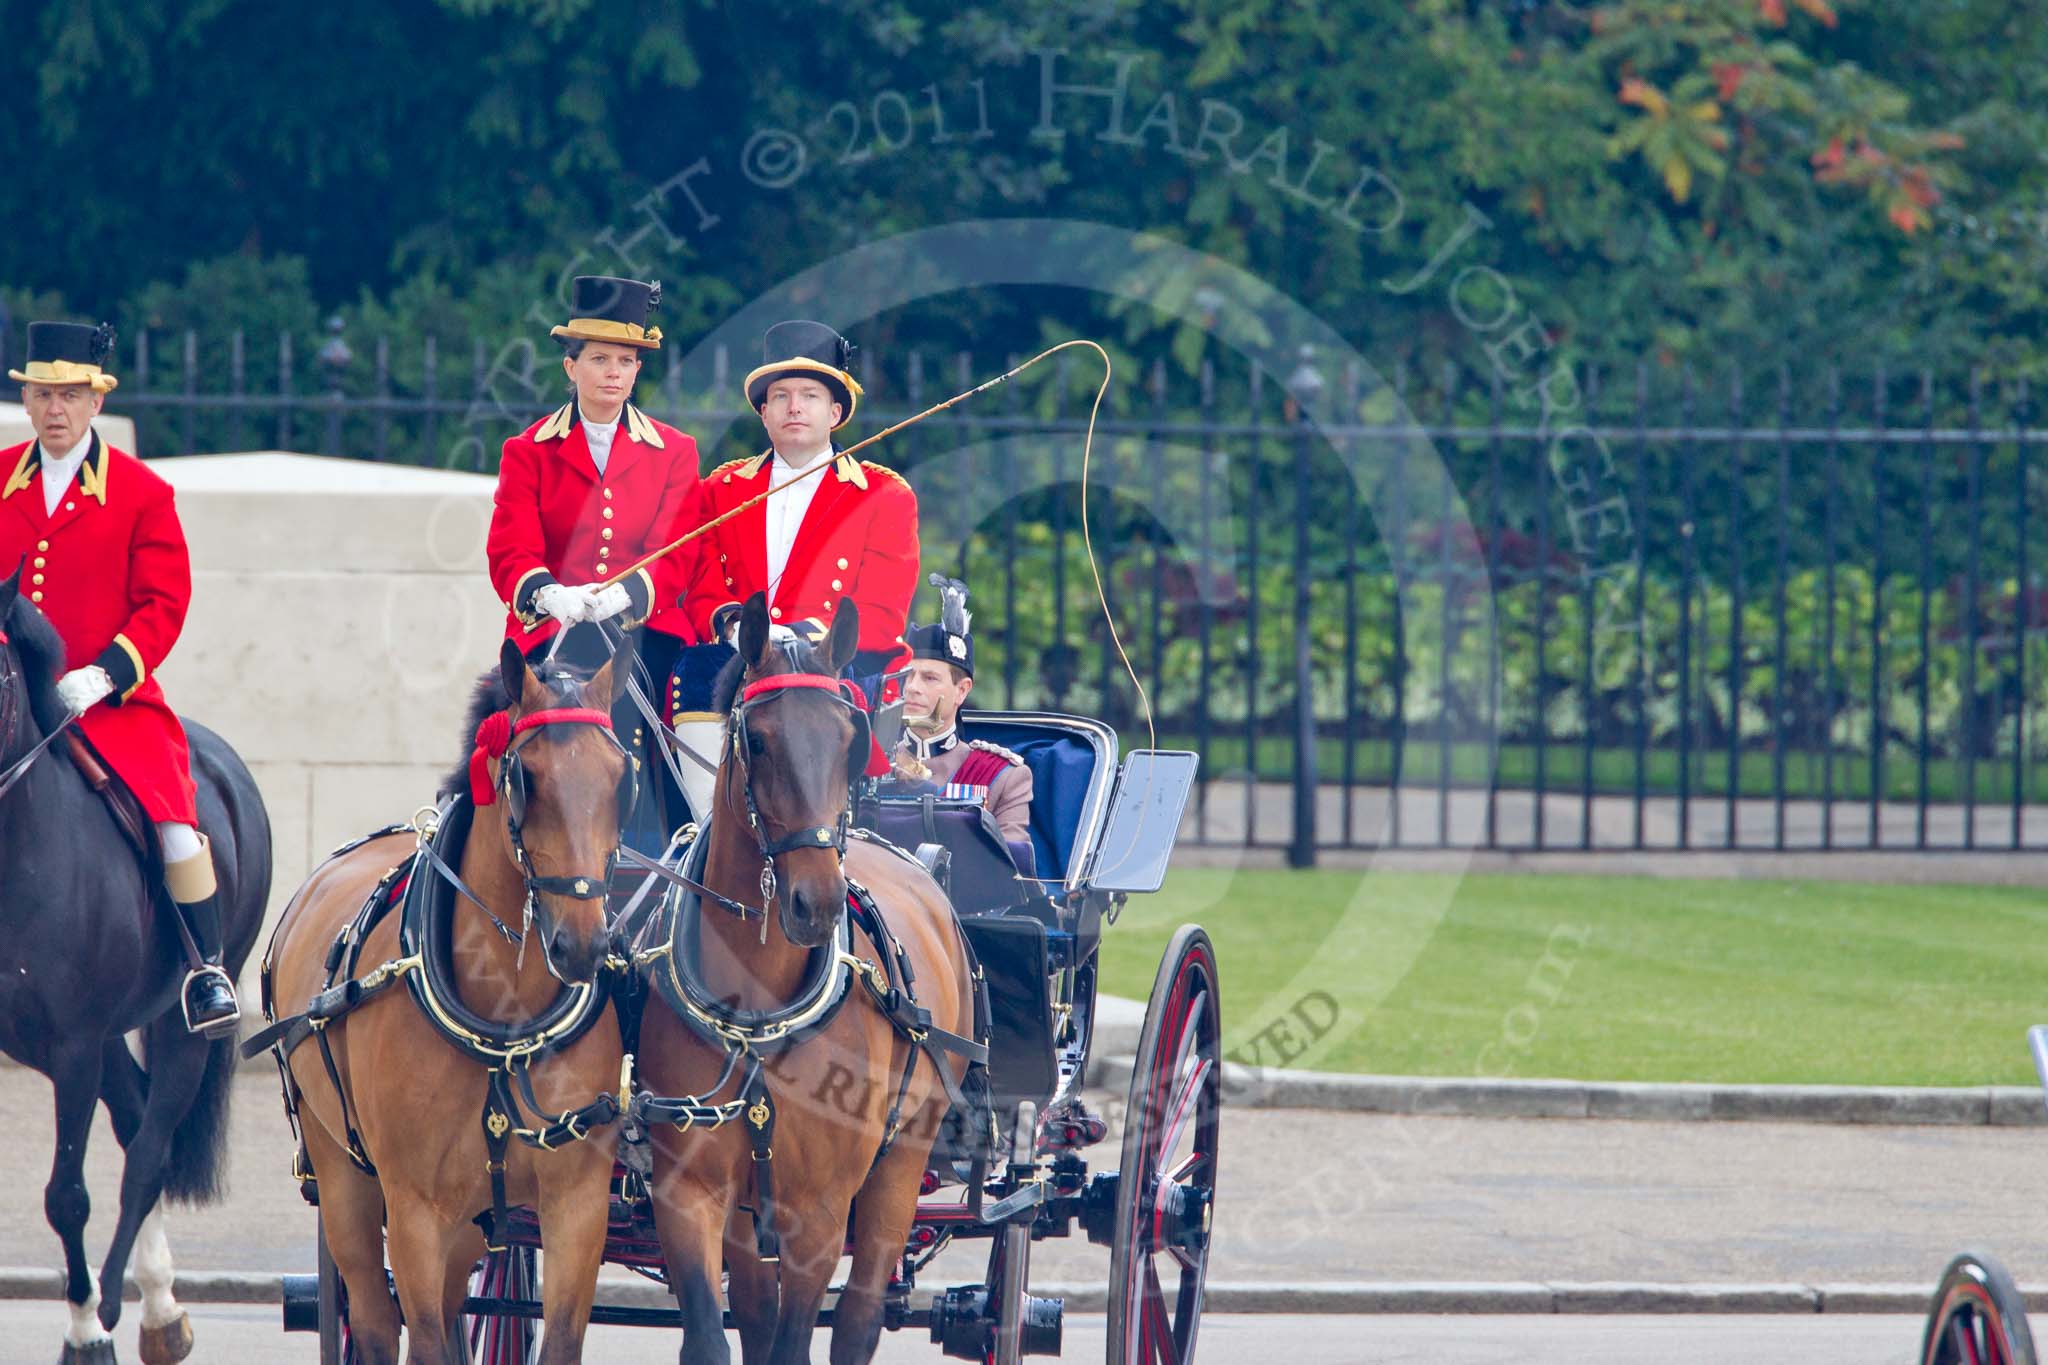 Trooping the Colour 2011: In the second barouche carriage arriving at Horse Guards Parade, on the right HRH Prince Edward, The Earl of Essex..
Horse Guards Parade, Westminster,
London SW1,
Greater London,
United Kingdom,
on 11 June 2011 at 10:50, image #84